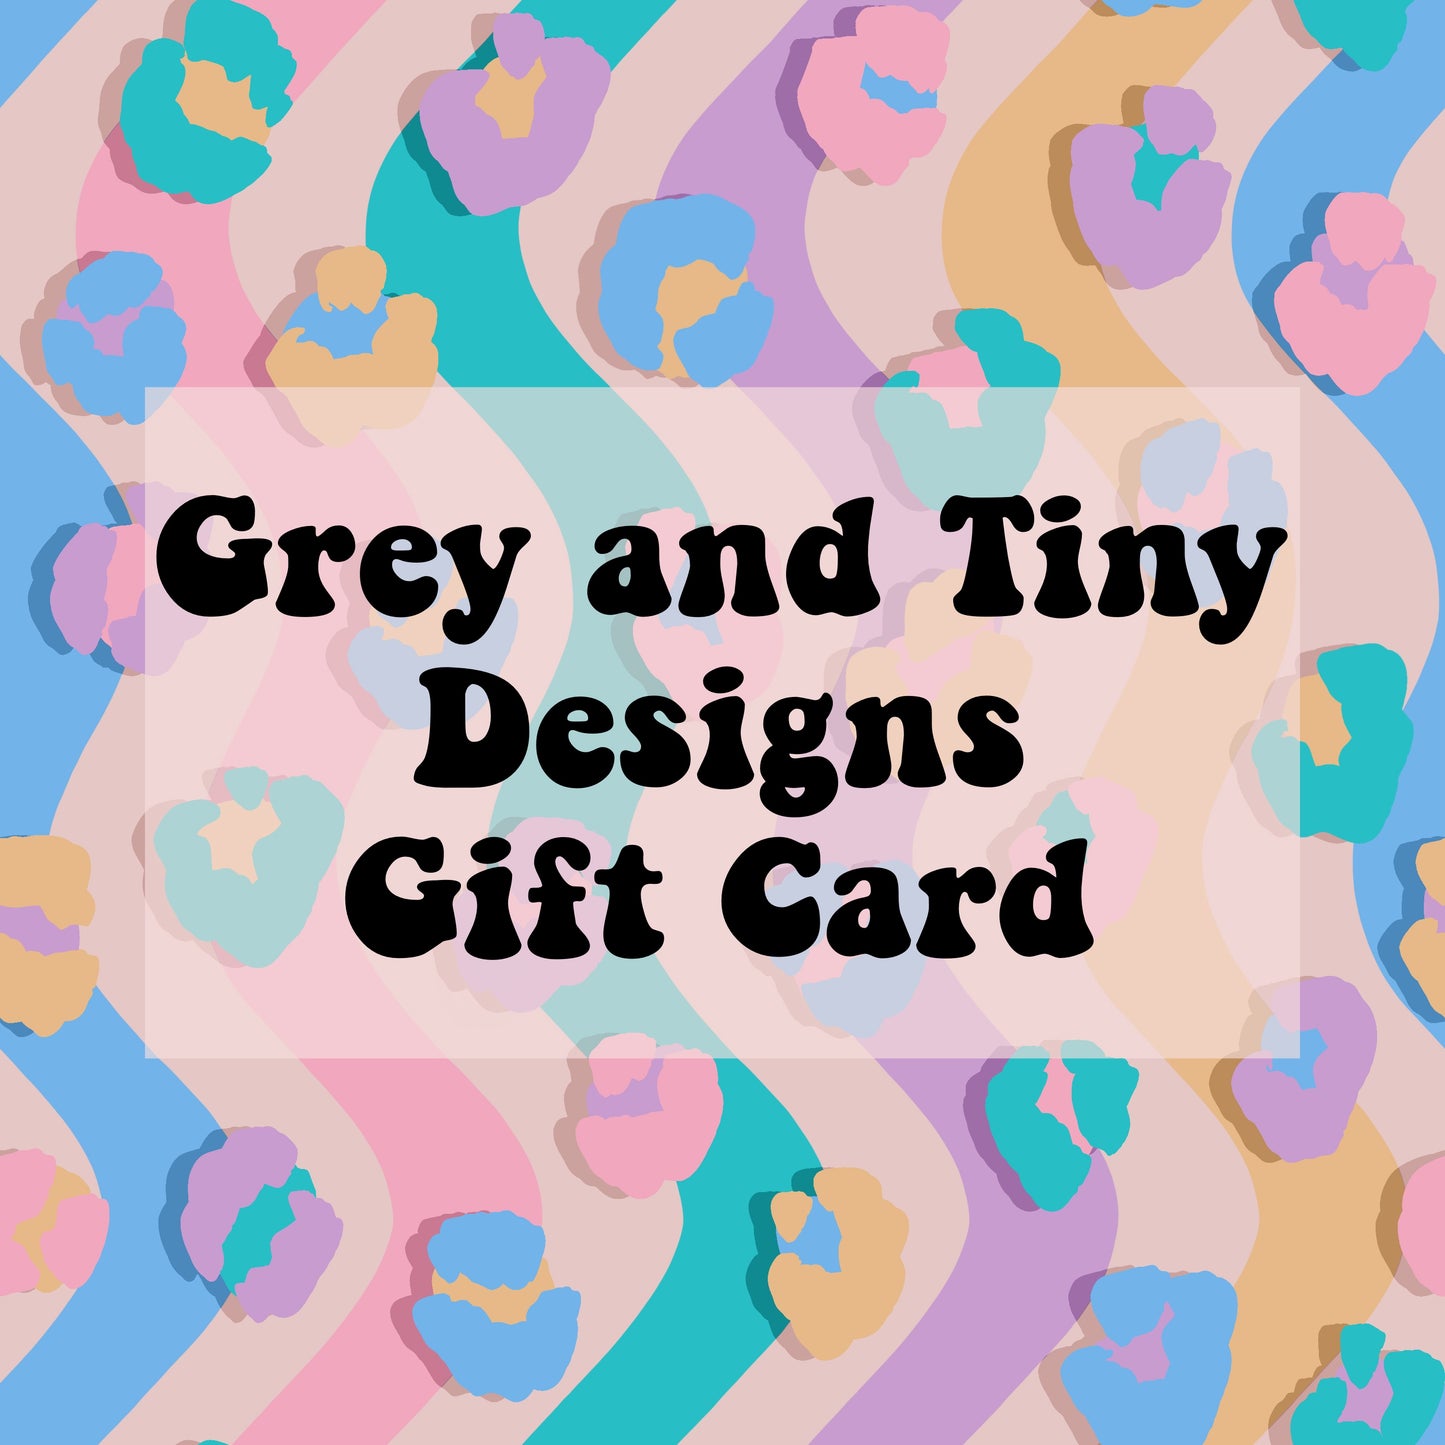 Grey and Tiny Designs gift card